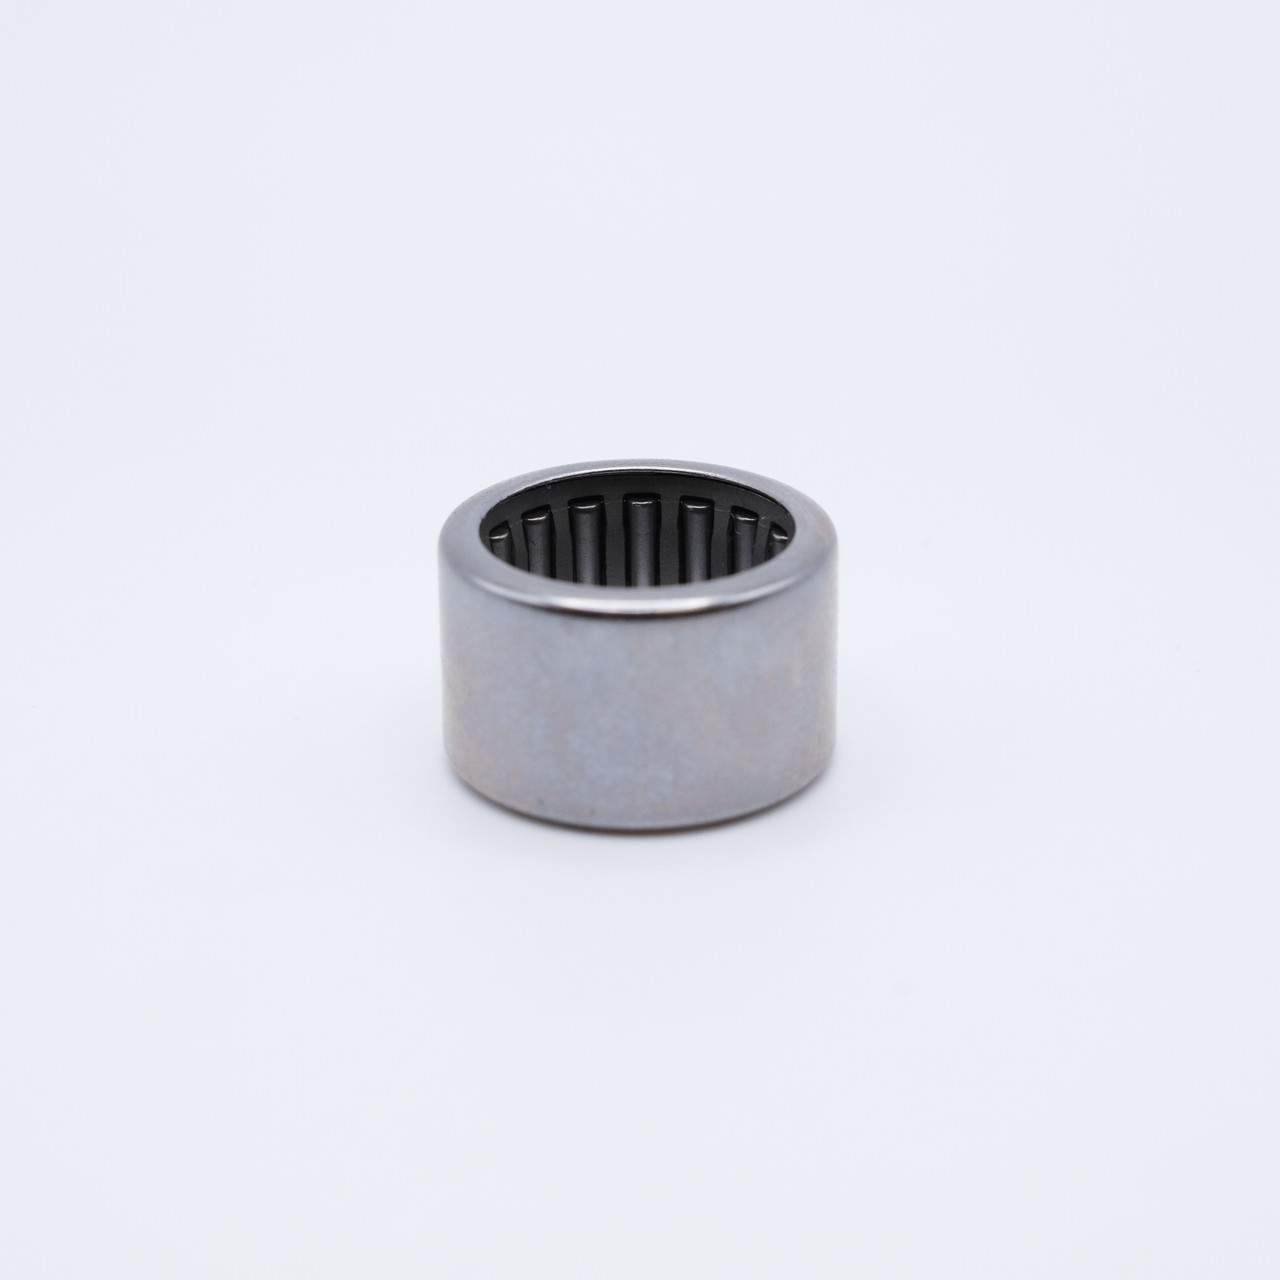 J-308 Needle Roller Bearing 1-7/8x2-1/4x1/2 Inches IKO Top View